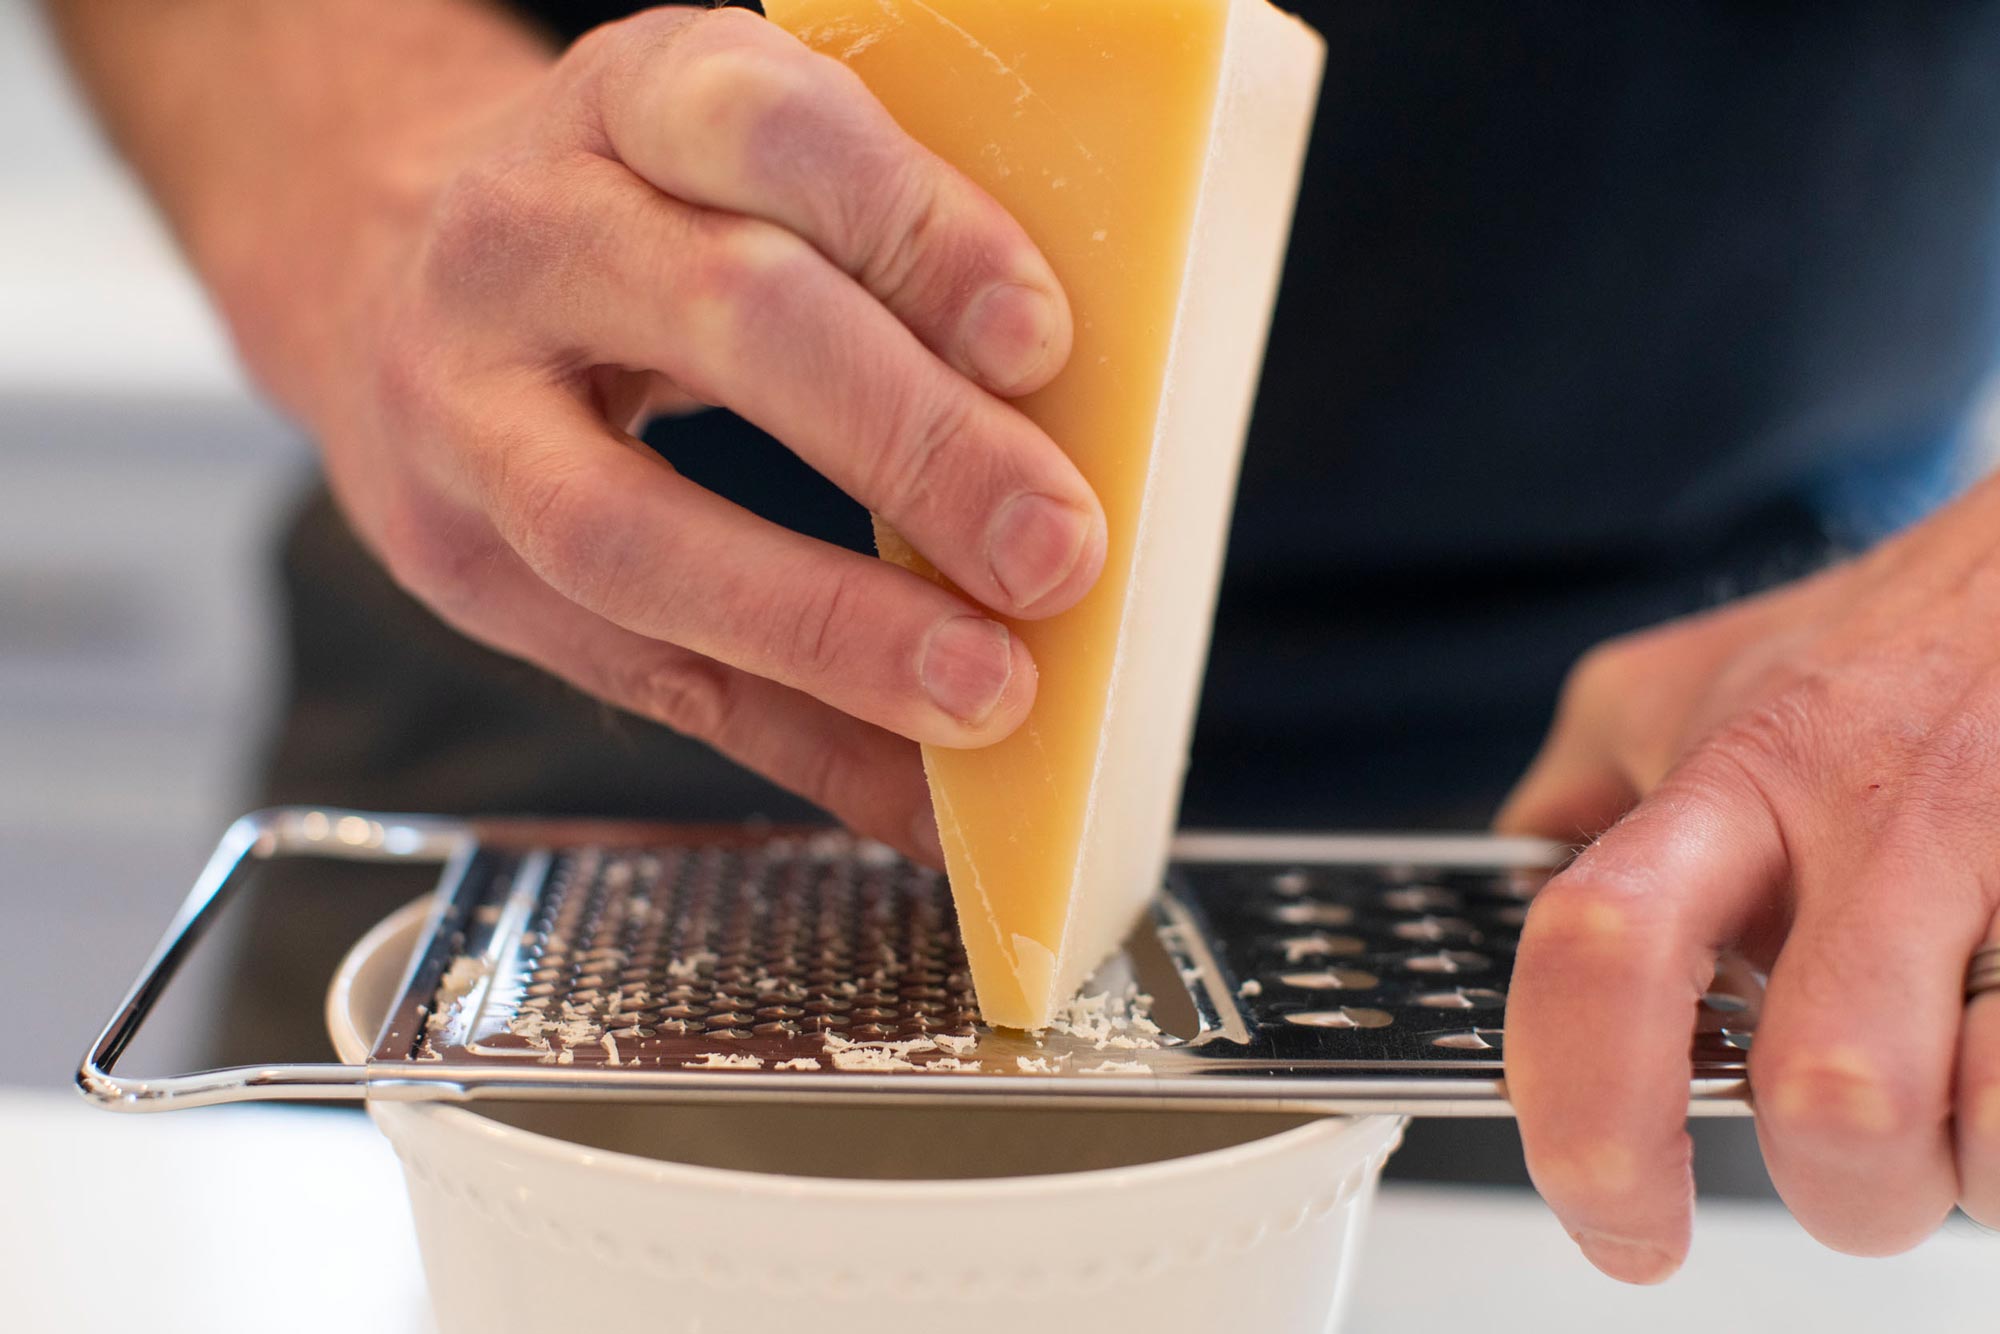 Person grating cheese into a bowl